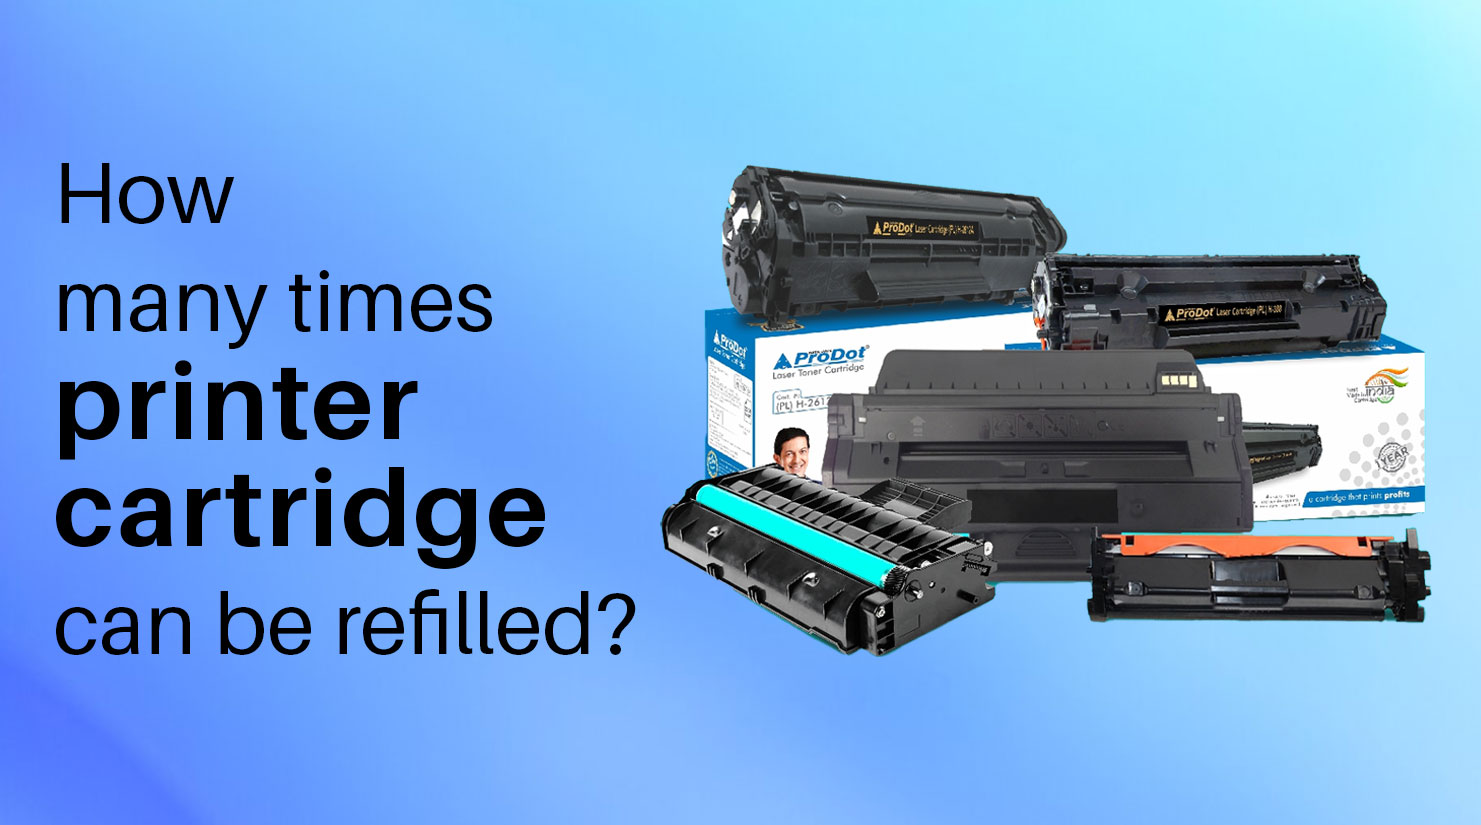 how many times can you refill a printer cartridge